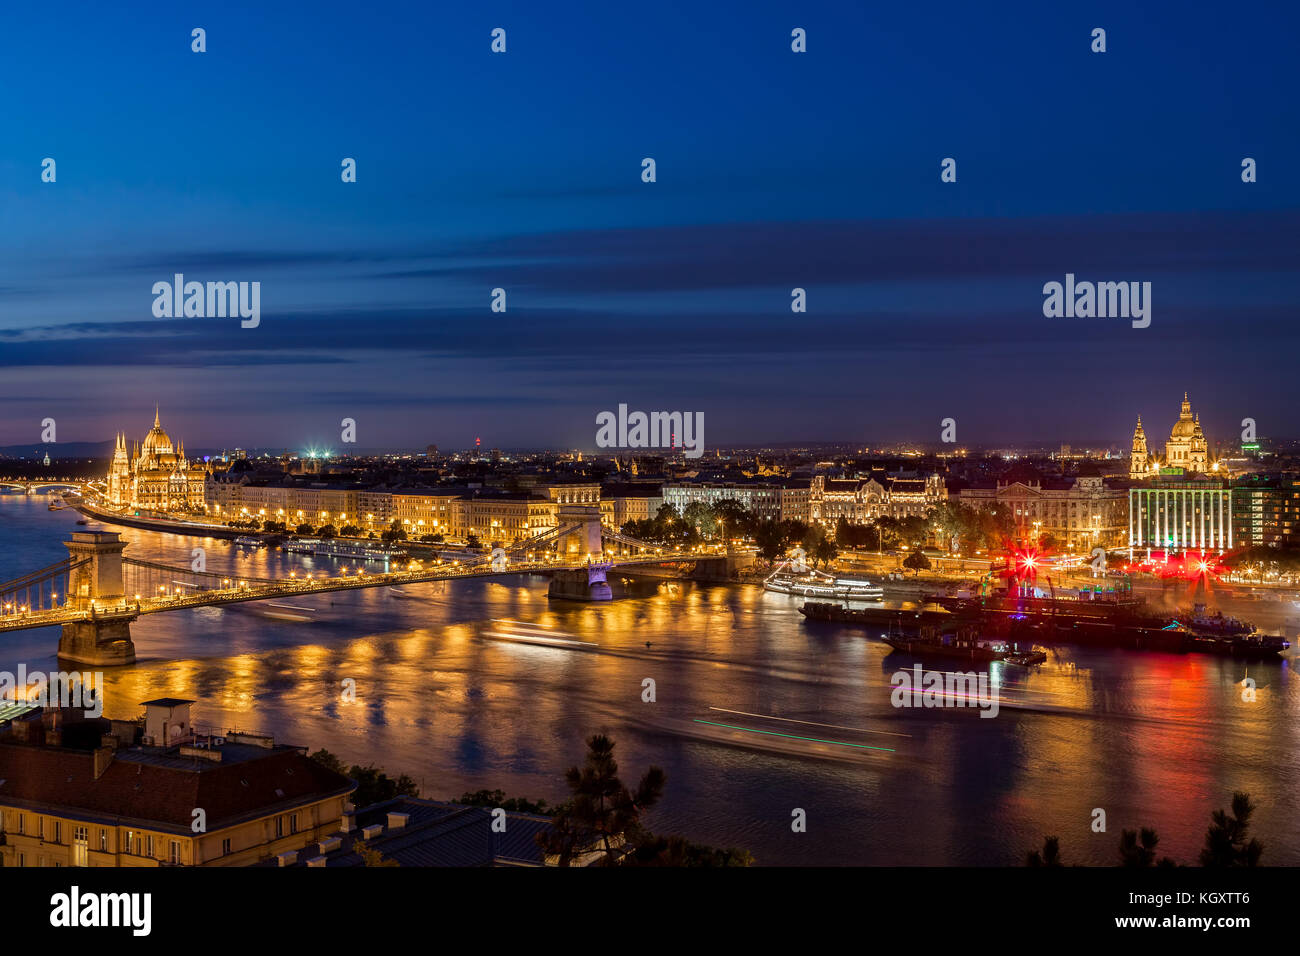 Budapest city by night in Hungary, nightscape with Chain Bridge on Danube River, view from Buda to Pest. Stock Photo